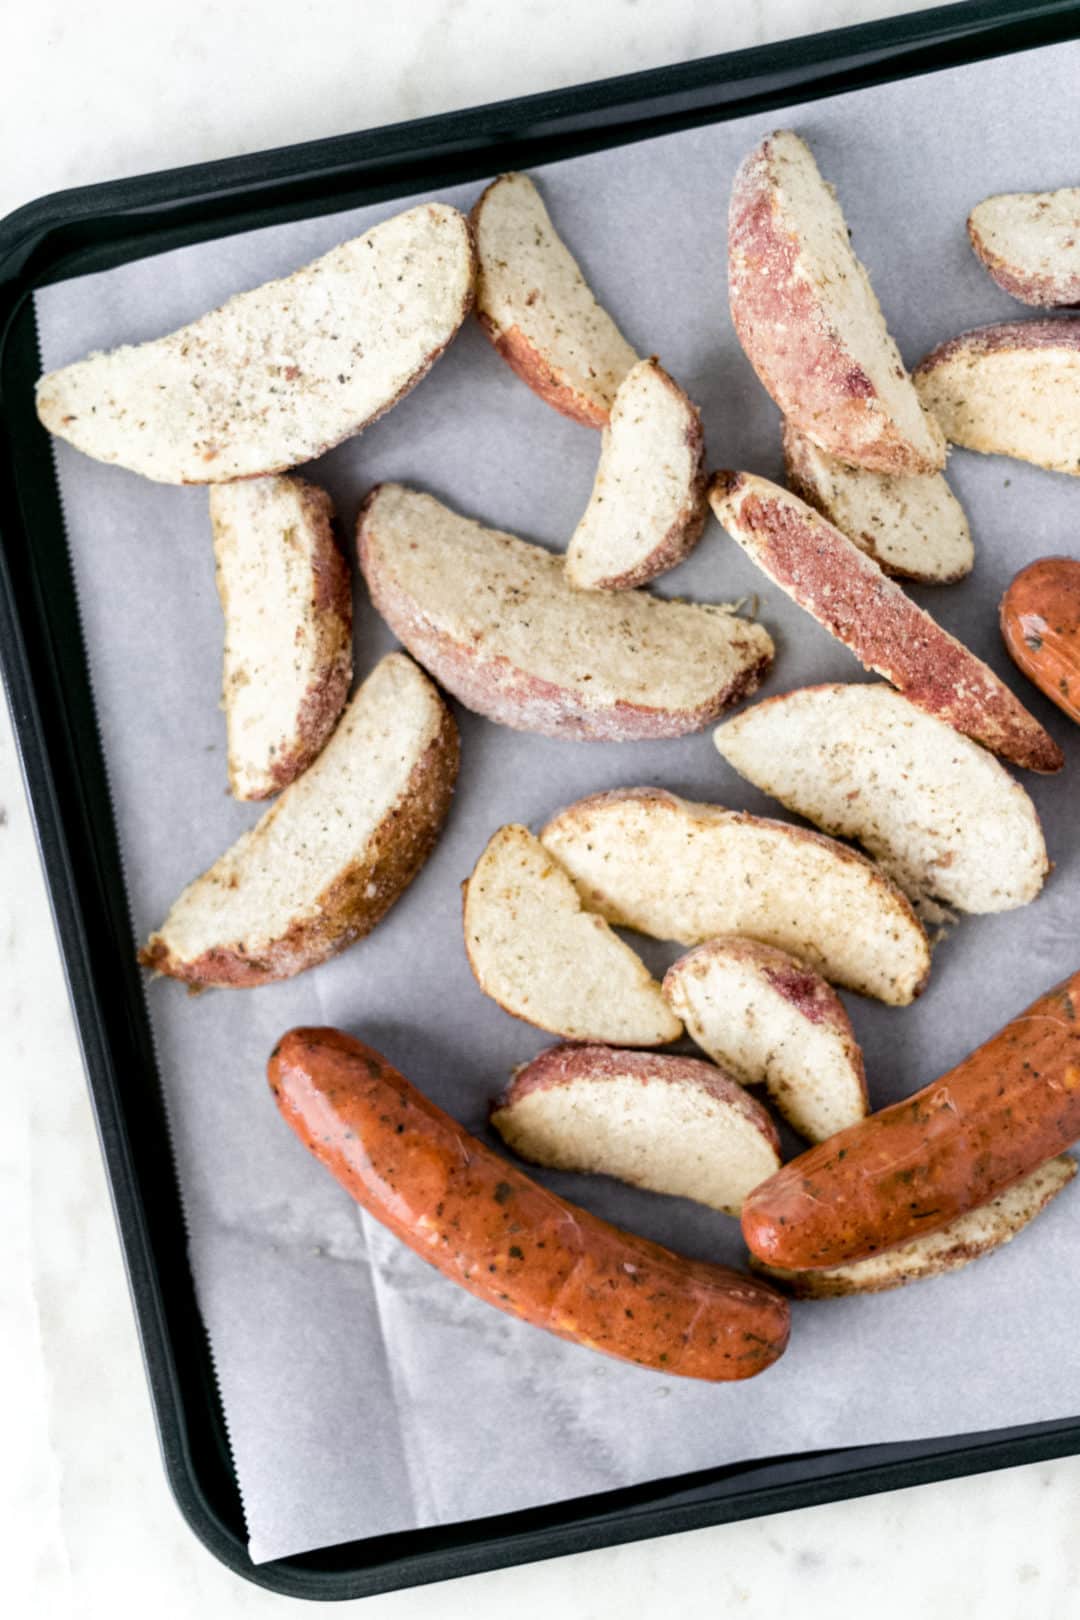 sausage and frozen potato wedges on sheet pan over parchment paper